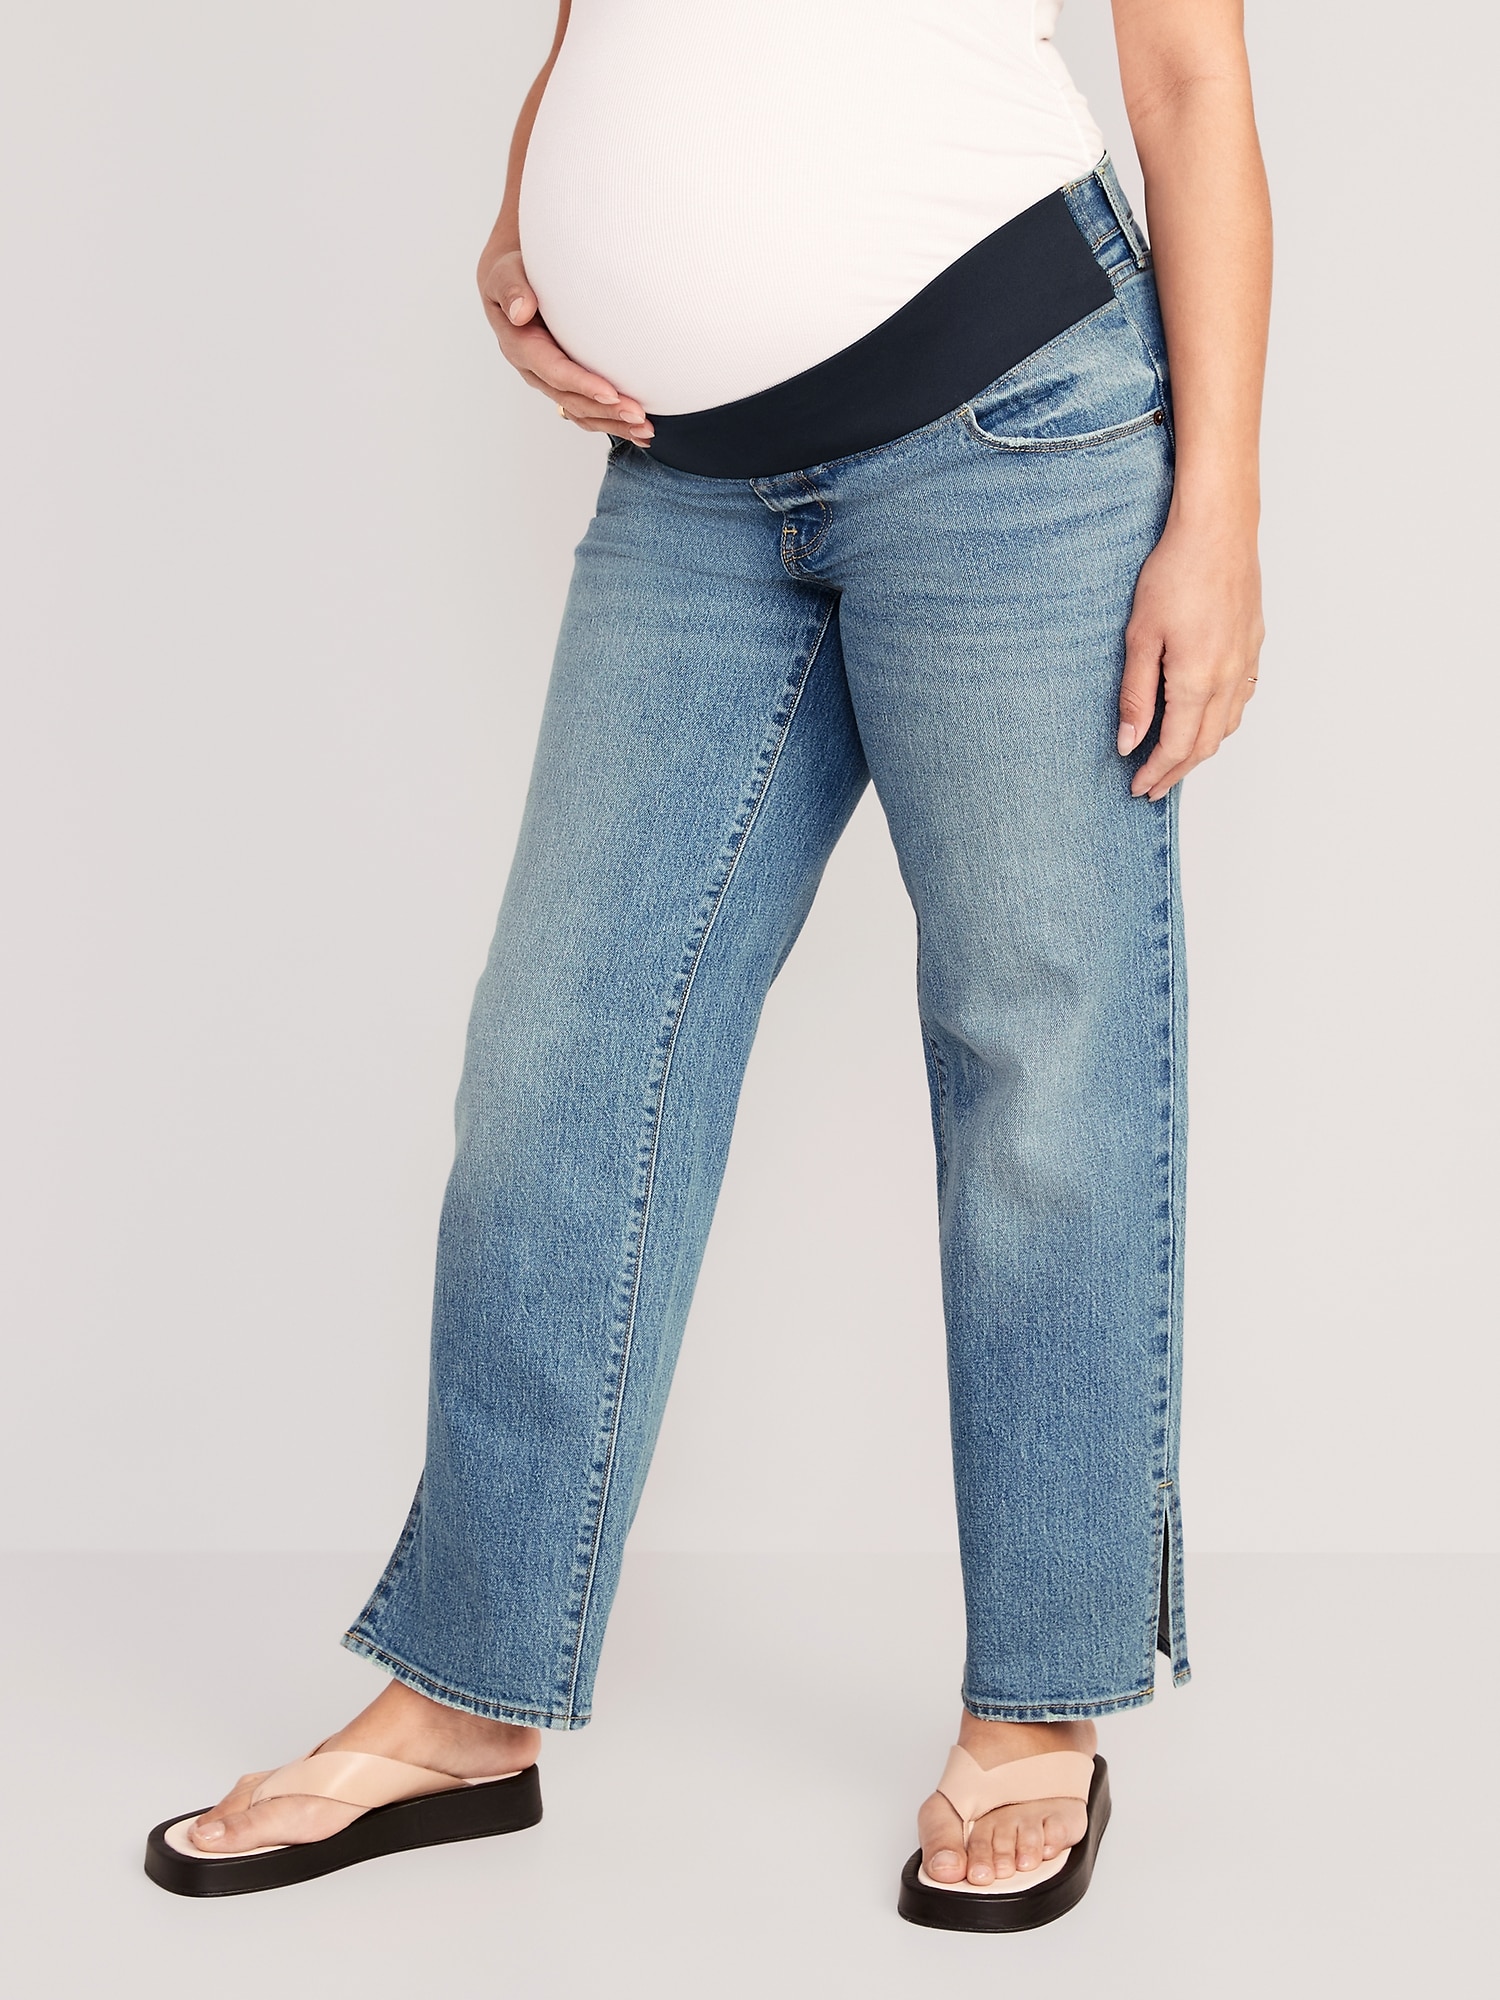 Long Maternity Jeans | Old Navy